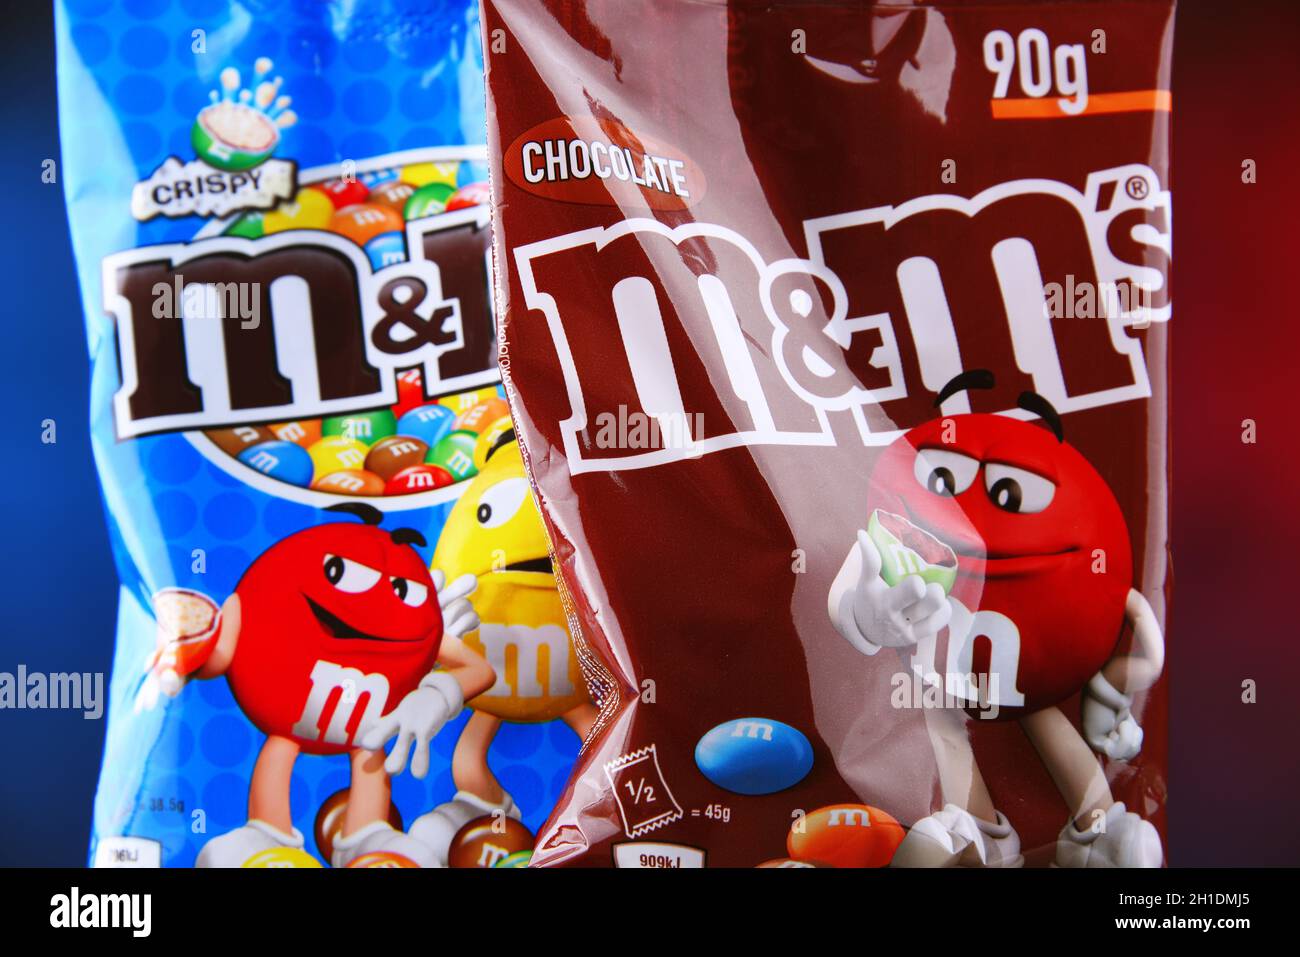 POZNAN, POL - APR 7, 2020: Packages of M&M's, multi-colored button-shaped chocolates produced by Mars, Incorporated Stock Photo